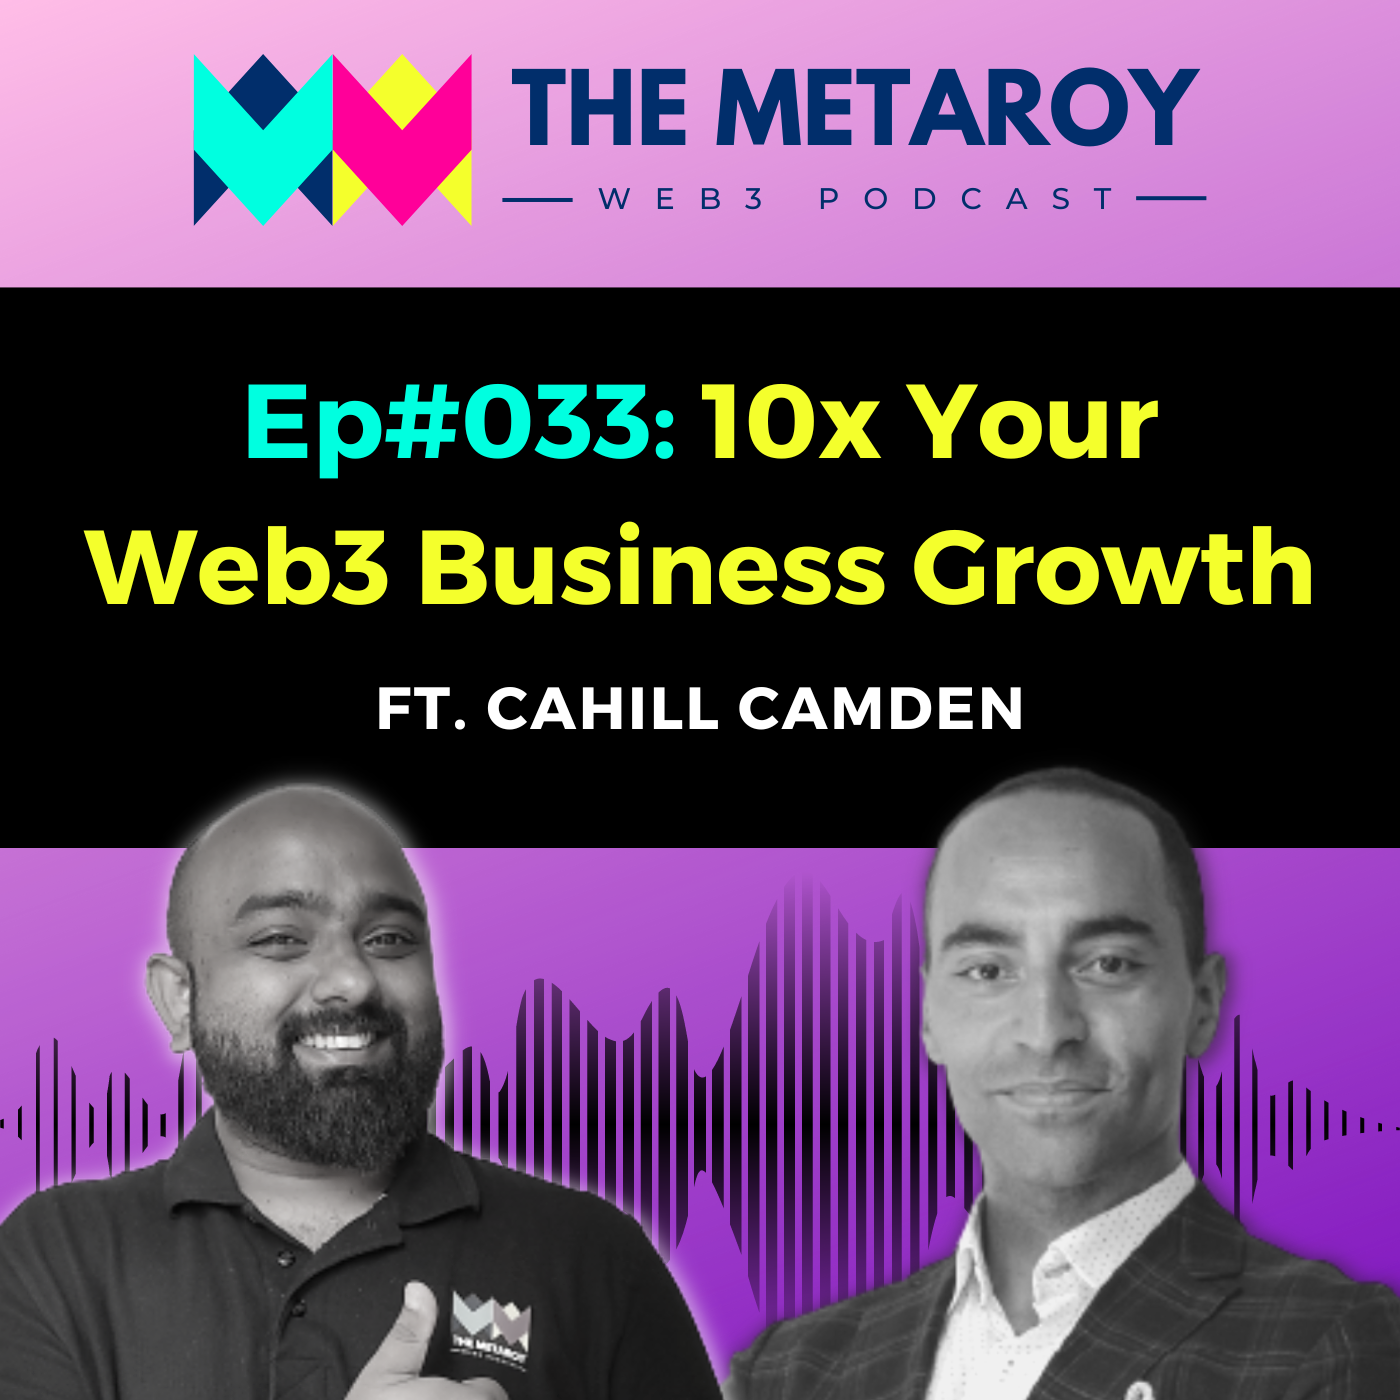 Cahill Camden: How To 10x Your Web3 Business Growth